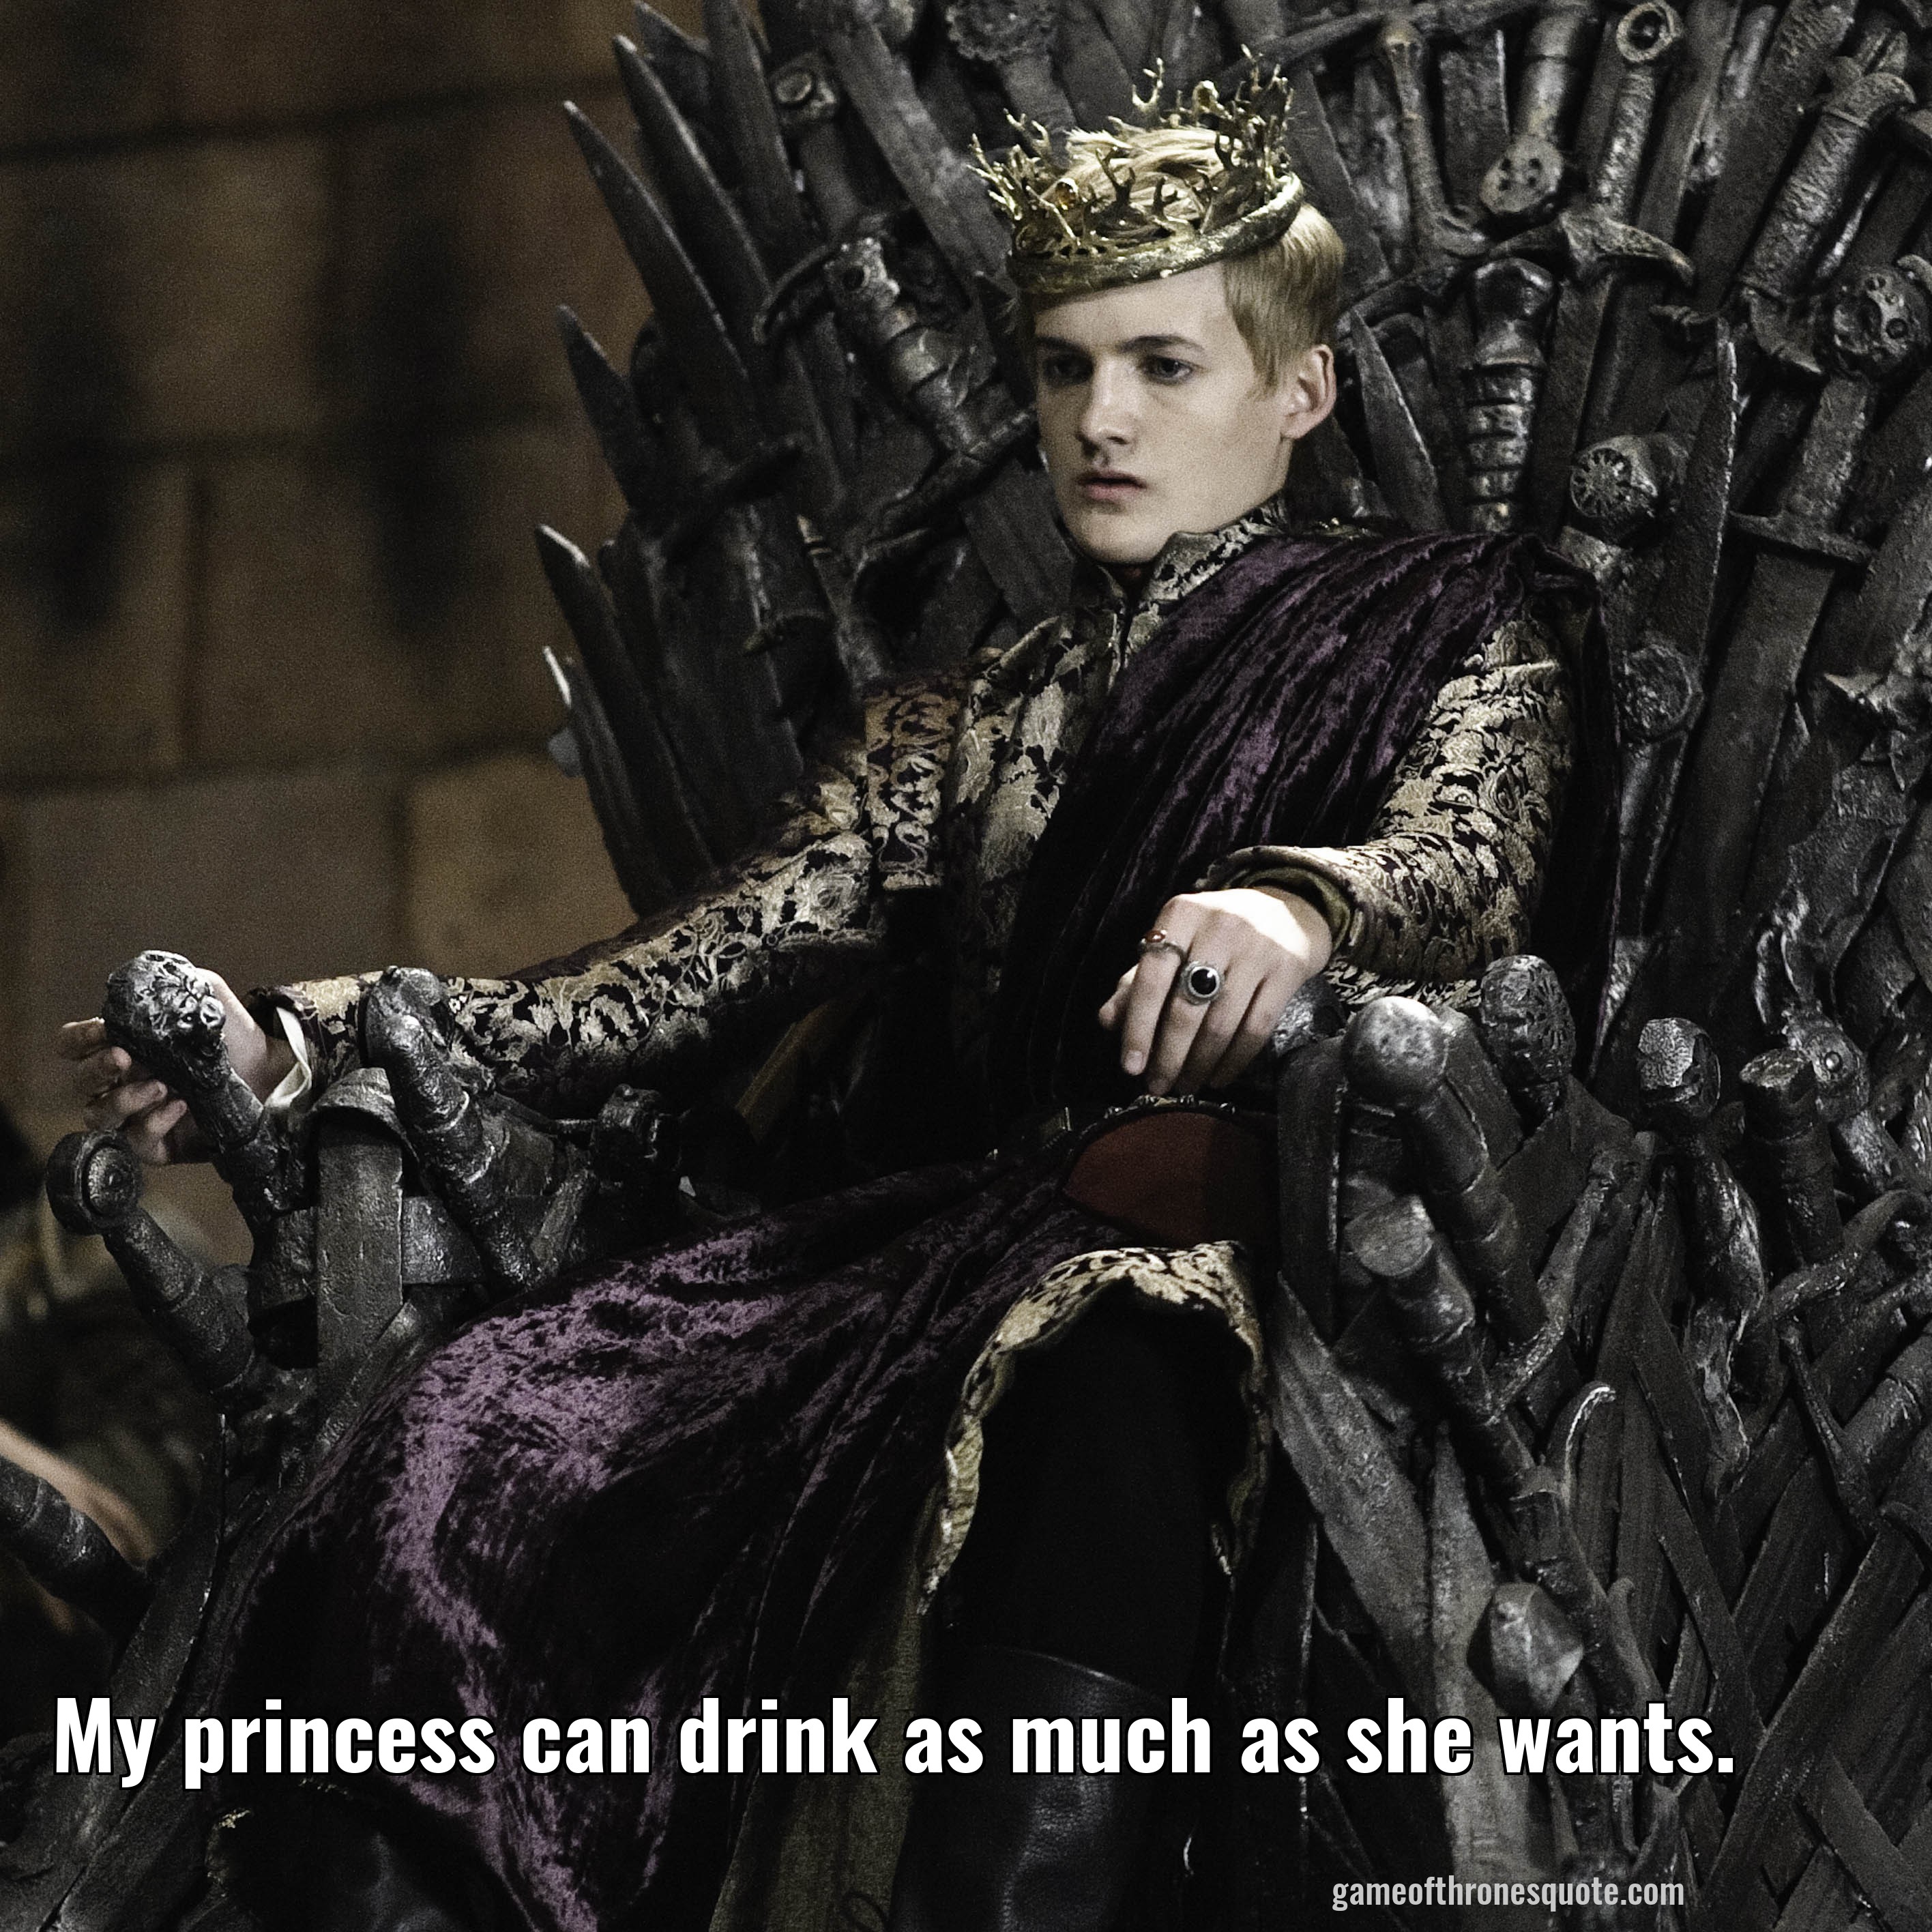 My princess can drink as much as she wants.